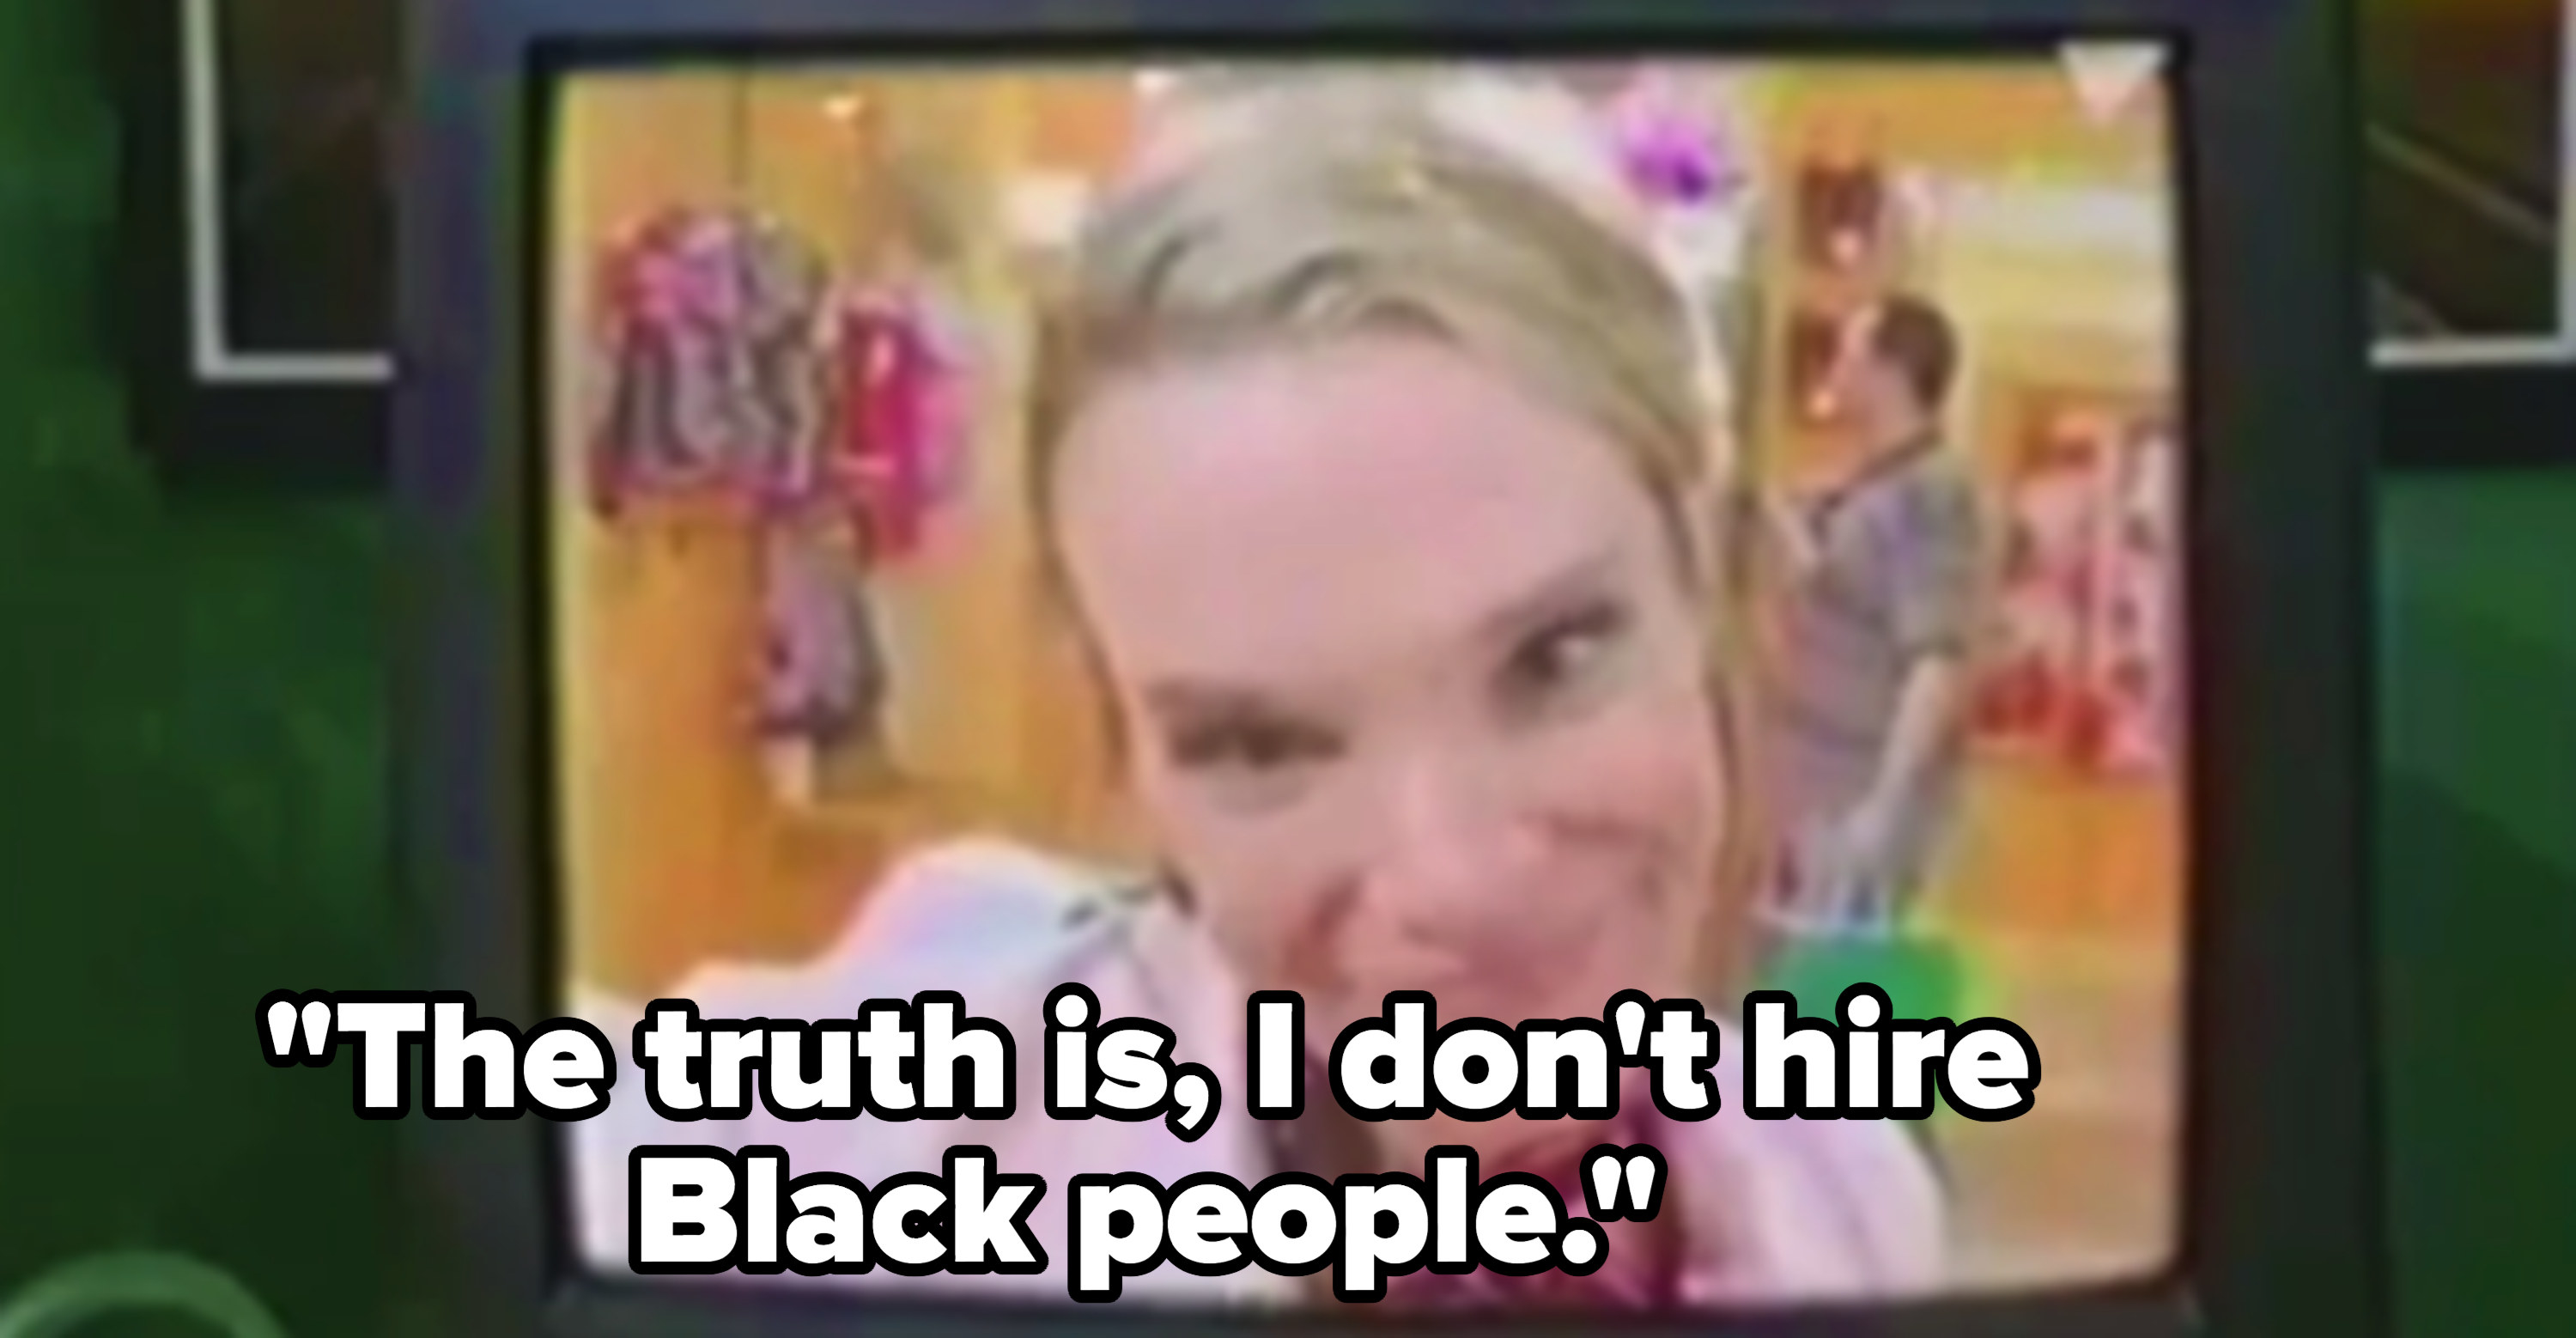 &quot;The truth is, I don&#x27;t hire Black people&quot;